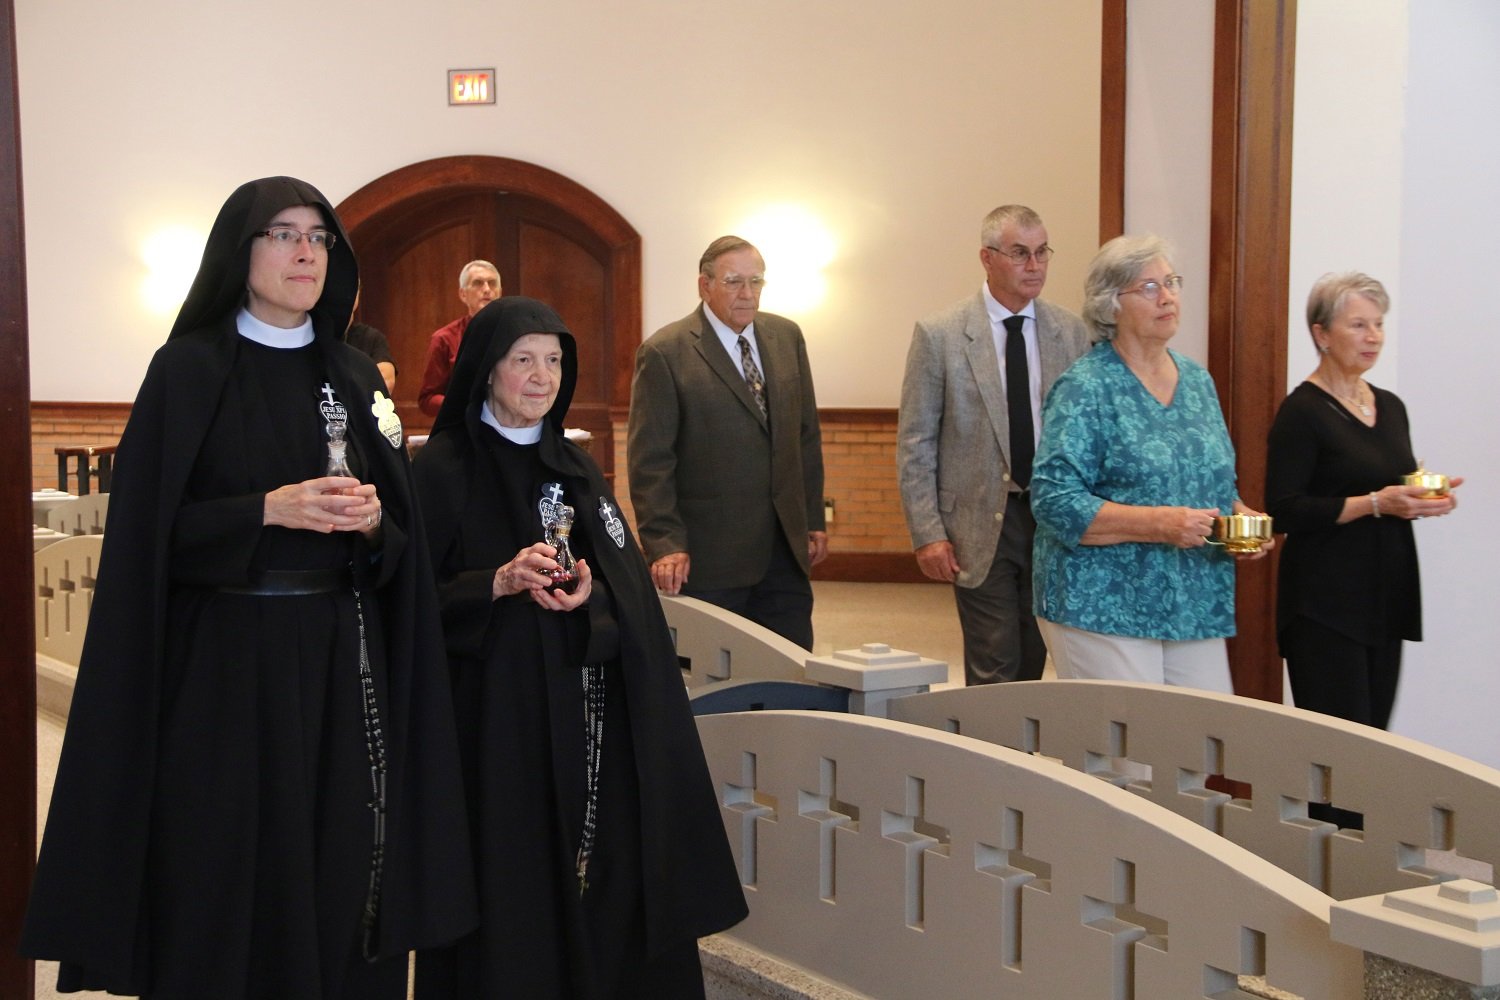  For the Offertory procession, Mother was joined by Sr. Mary Agnes (who, as Superior, received her vows 25 years ago), as well as her parents and godparents   (photo credit: Elizabeth Wong Barnstead, Western KY Catholic)  